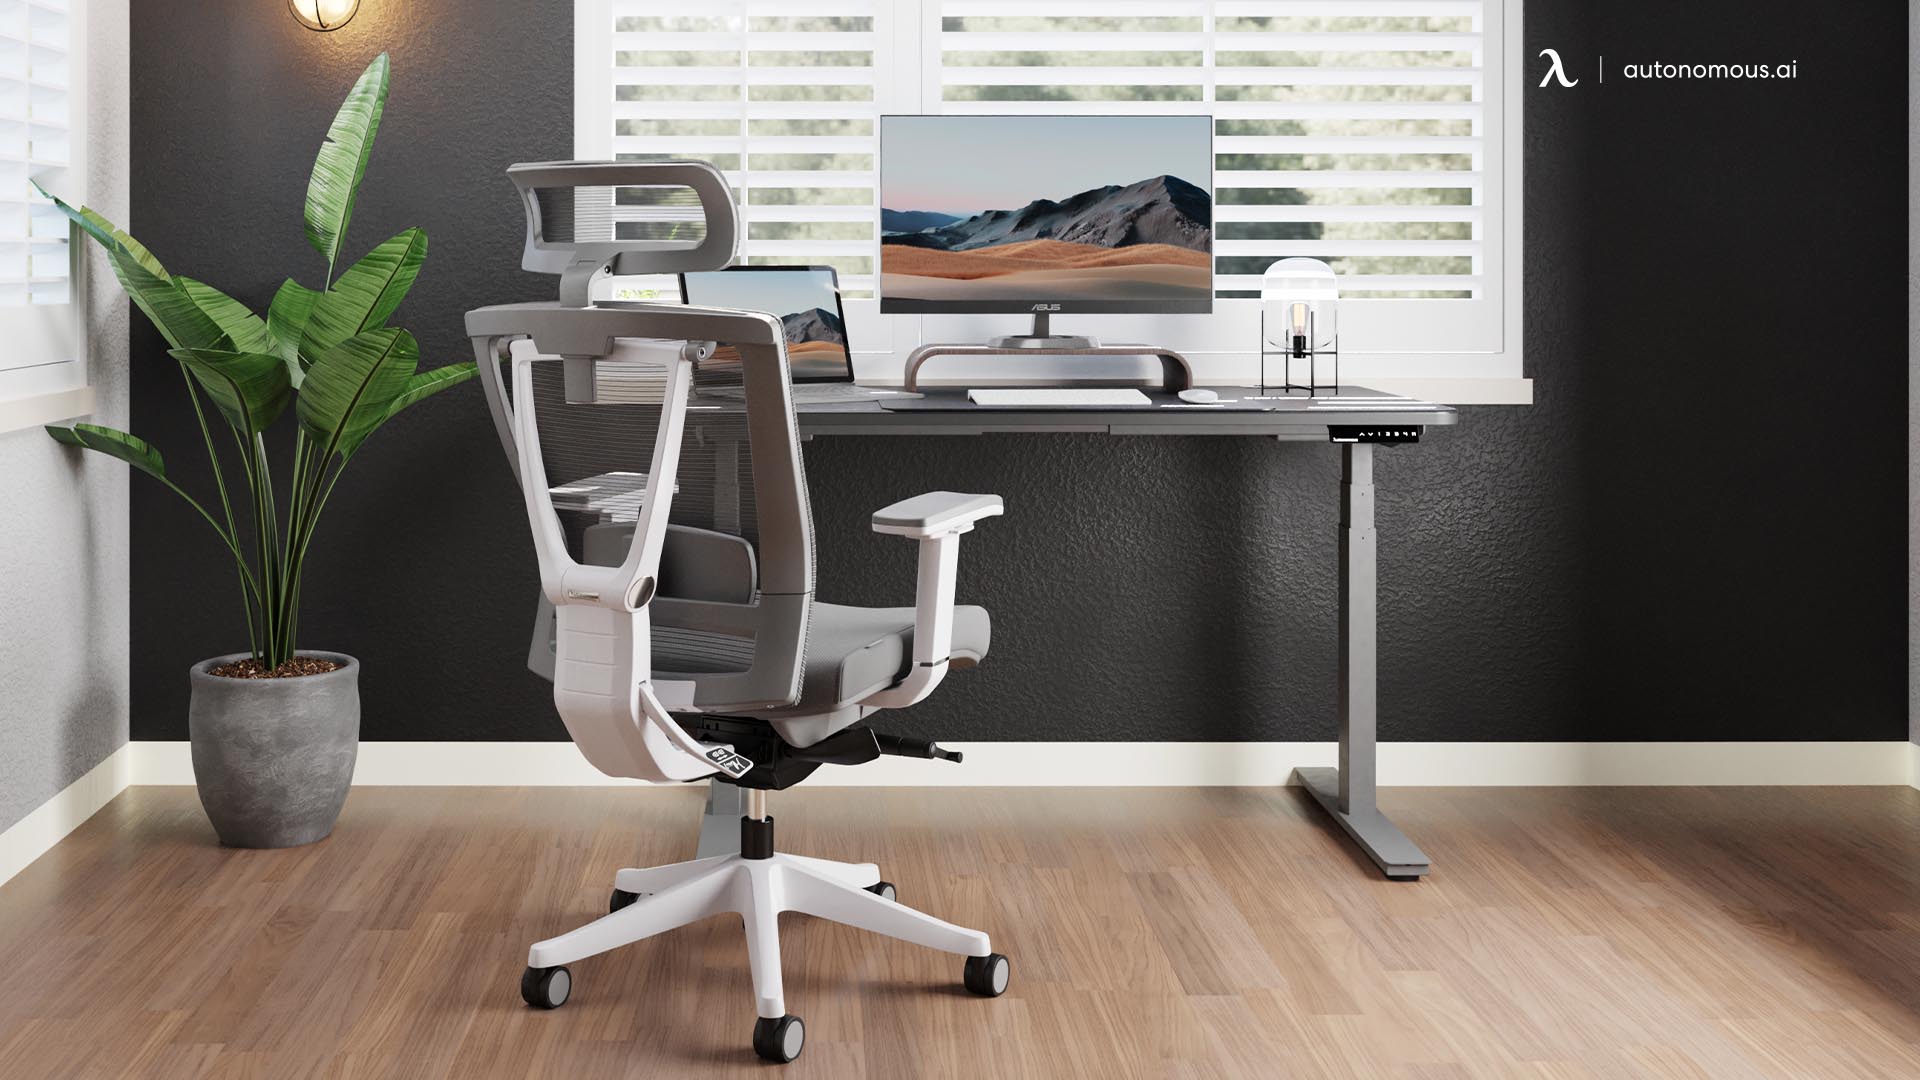 shopping for desks and chairs for the office